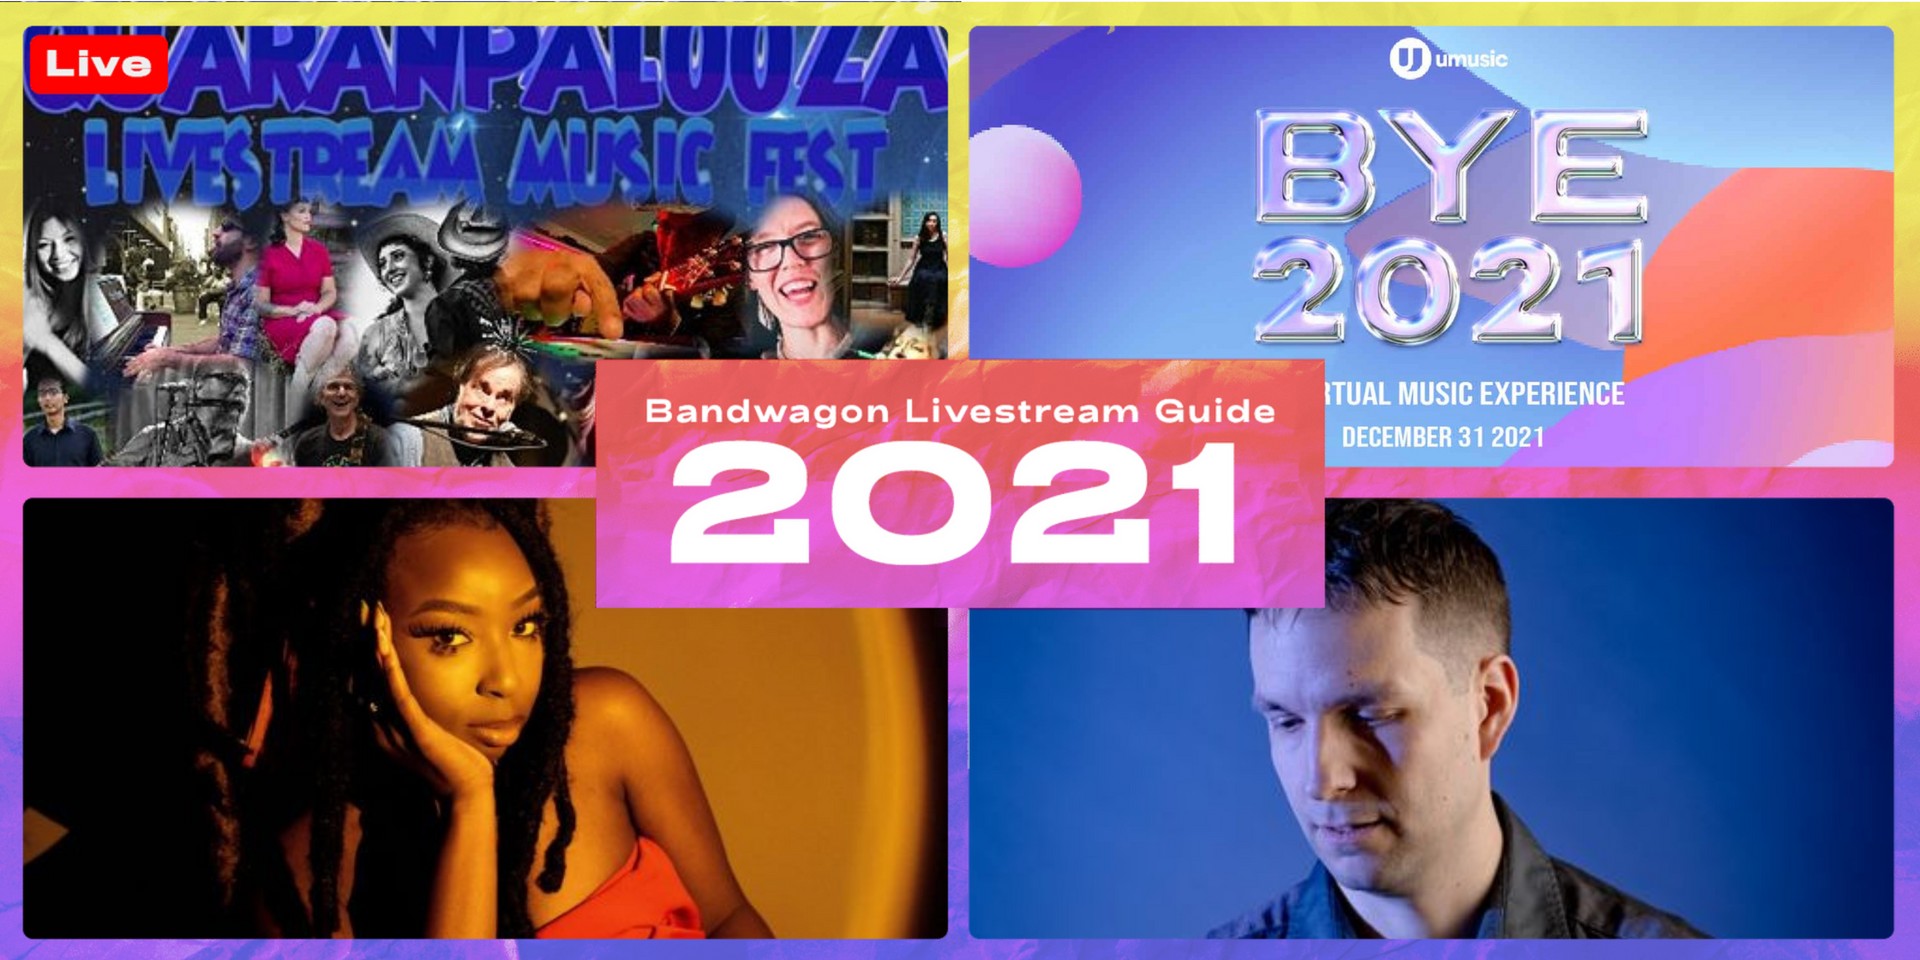 Online concerts and festivals to stream in 2021 - QuaranPalooza, TOMIKE, GrayBeat, and more